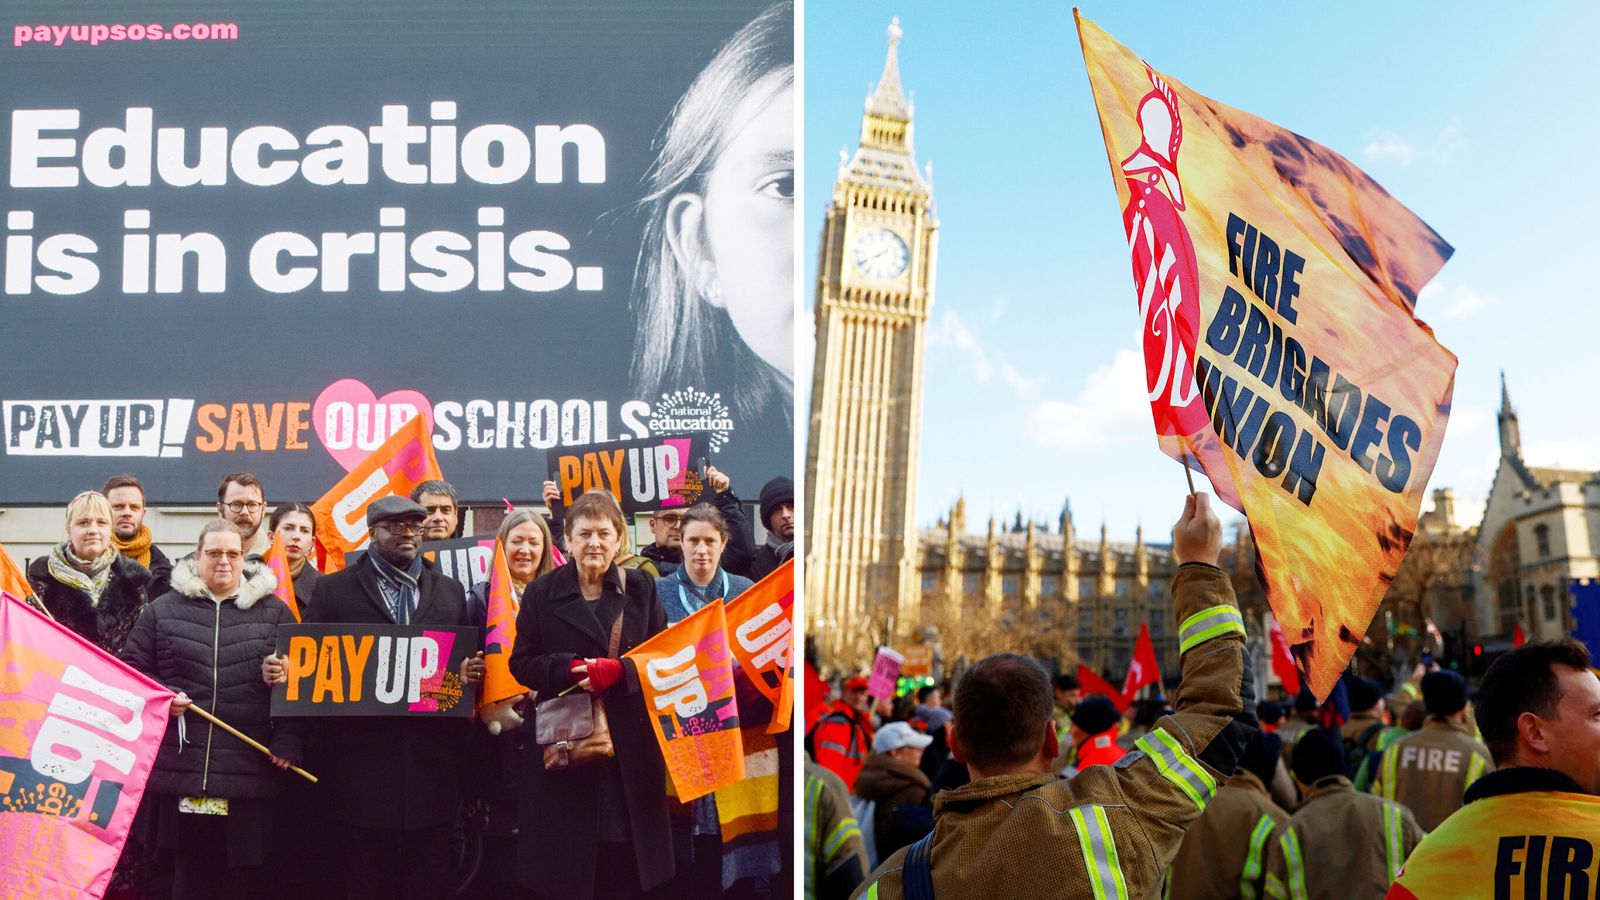 Firefighters and teachers to strike over pay as public sector walkouts continue